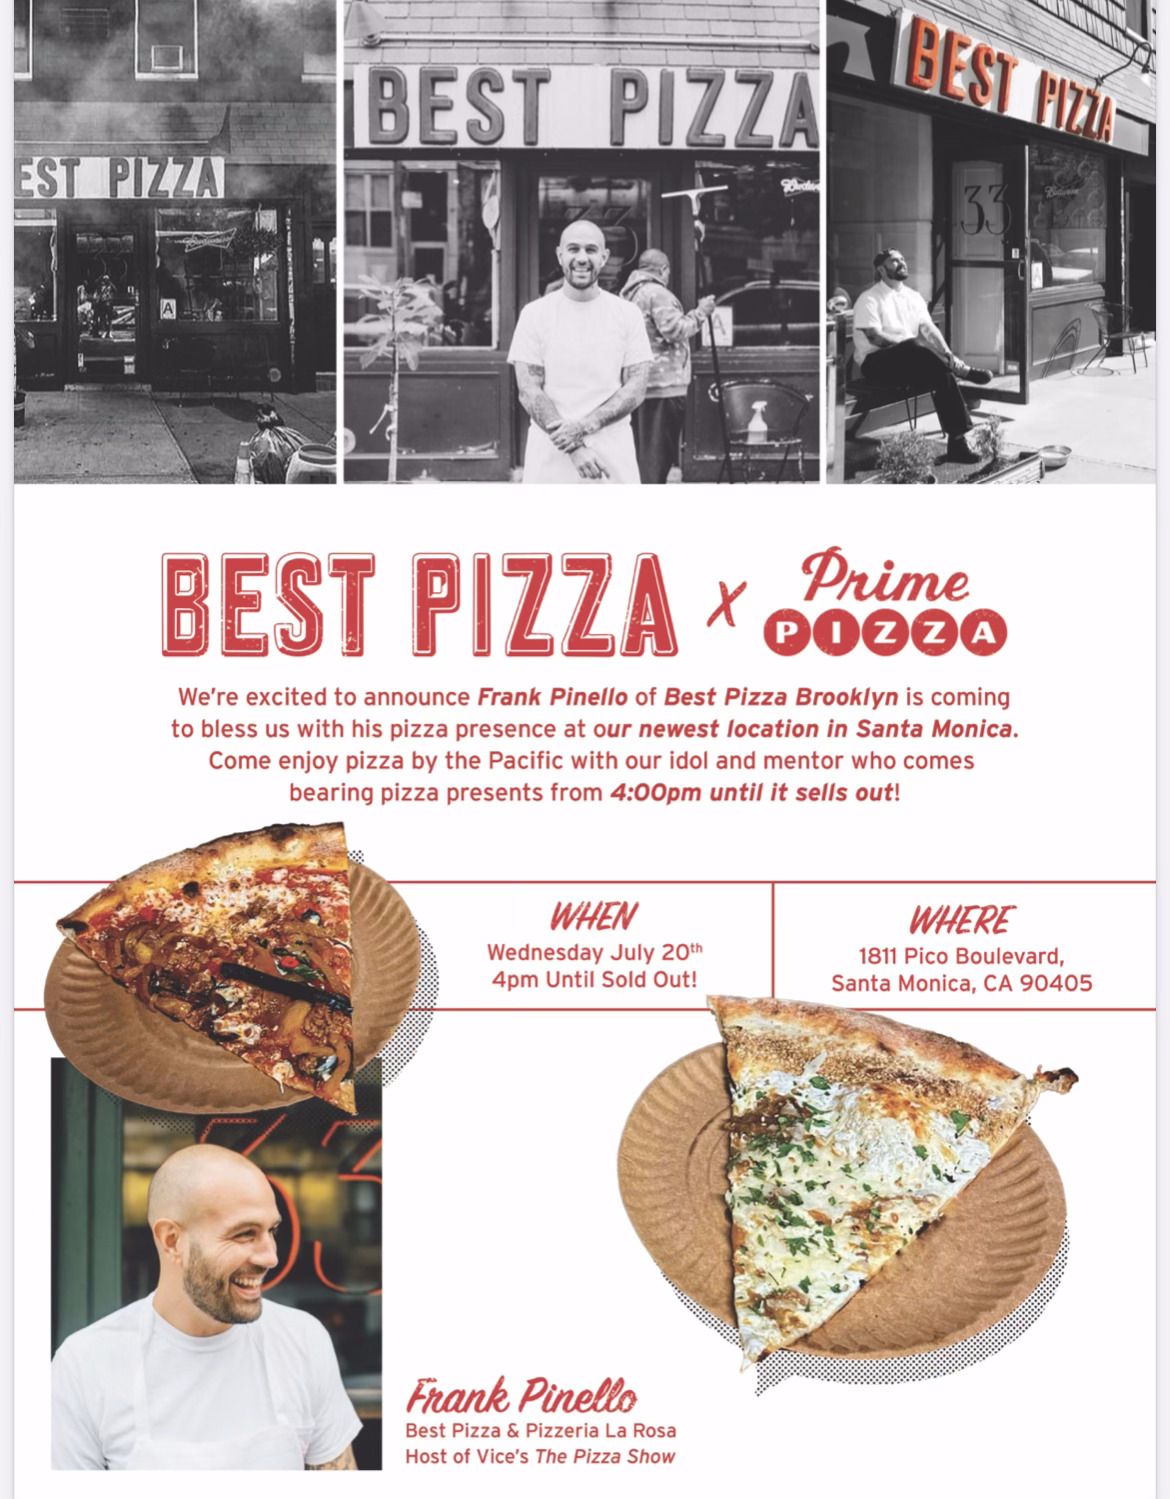 A flyer for a pizza pop-up featuring Best Pizza and Prime Pizza.